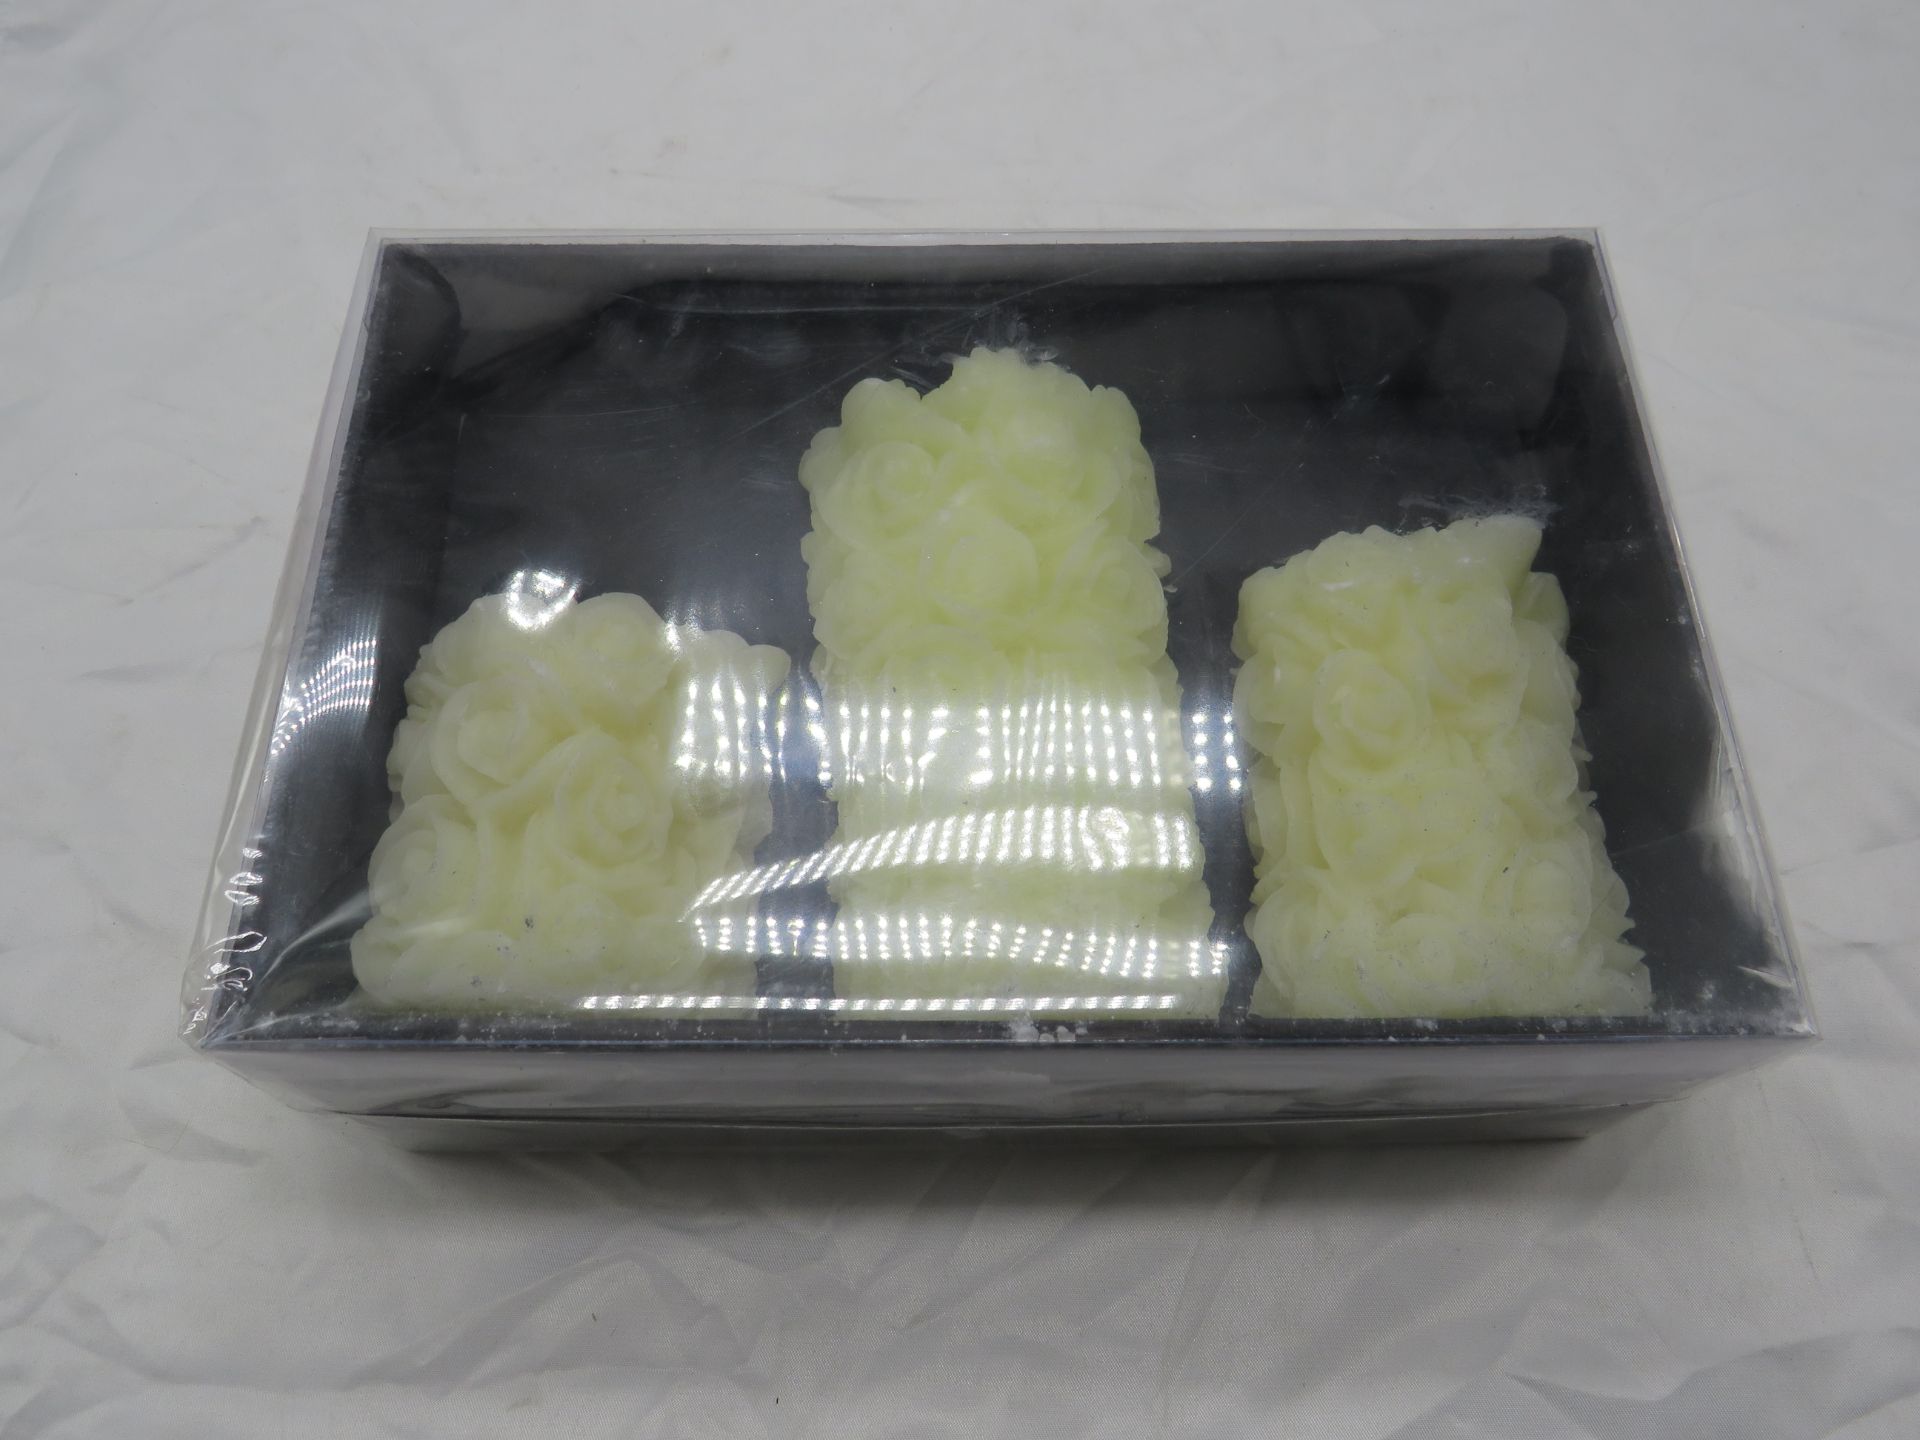 Set of 3 White Rose Pillar Candles - New & Packaged.